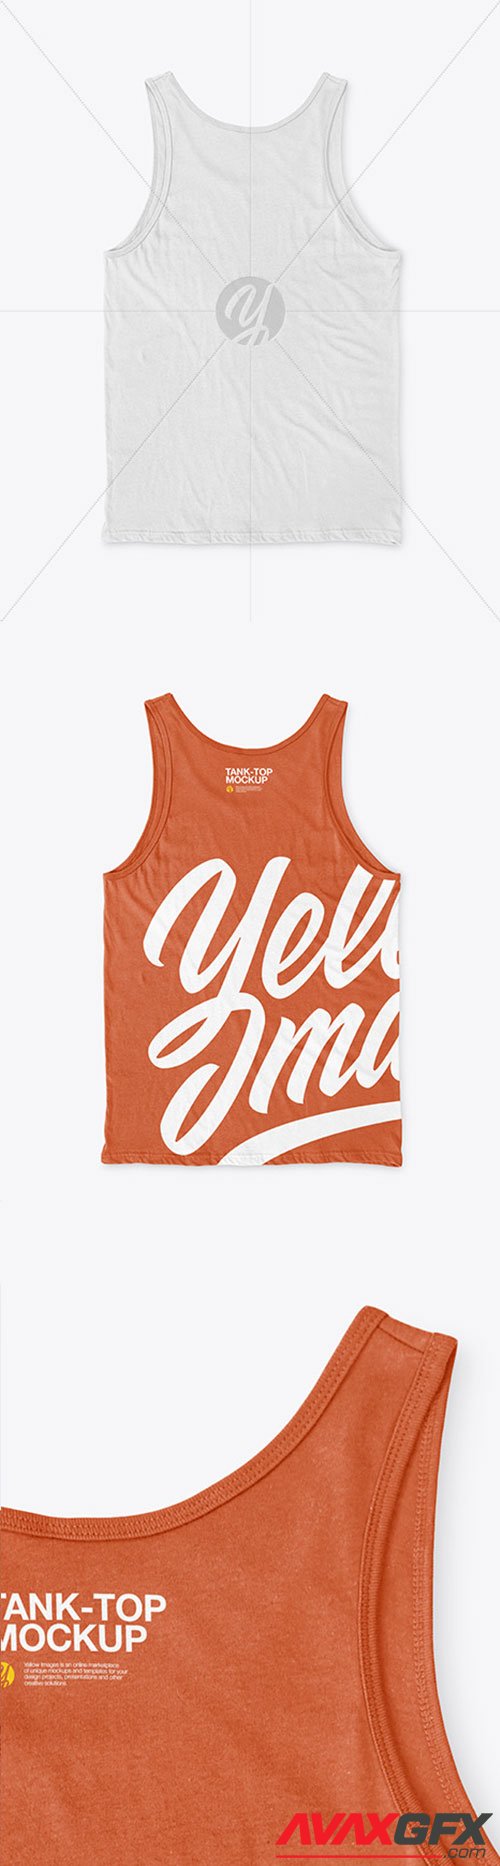 Tank Top with Round Neck Mockup 60748